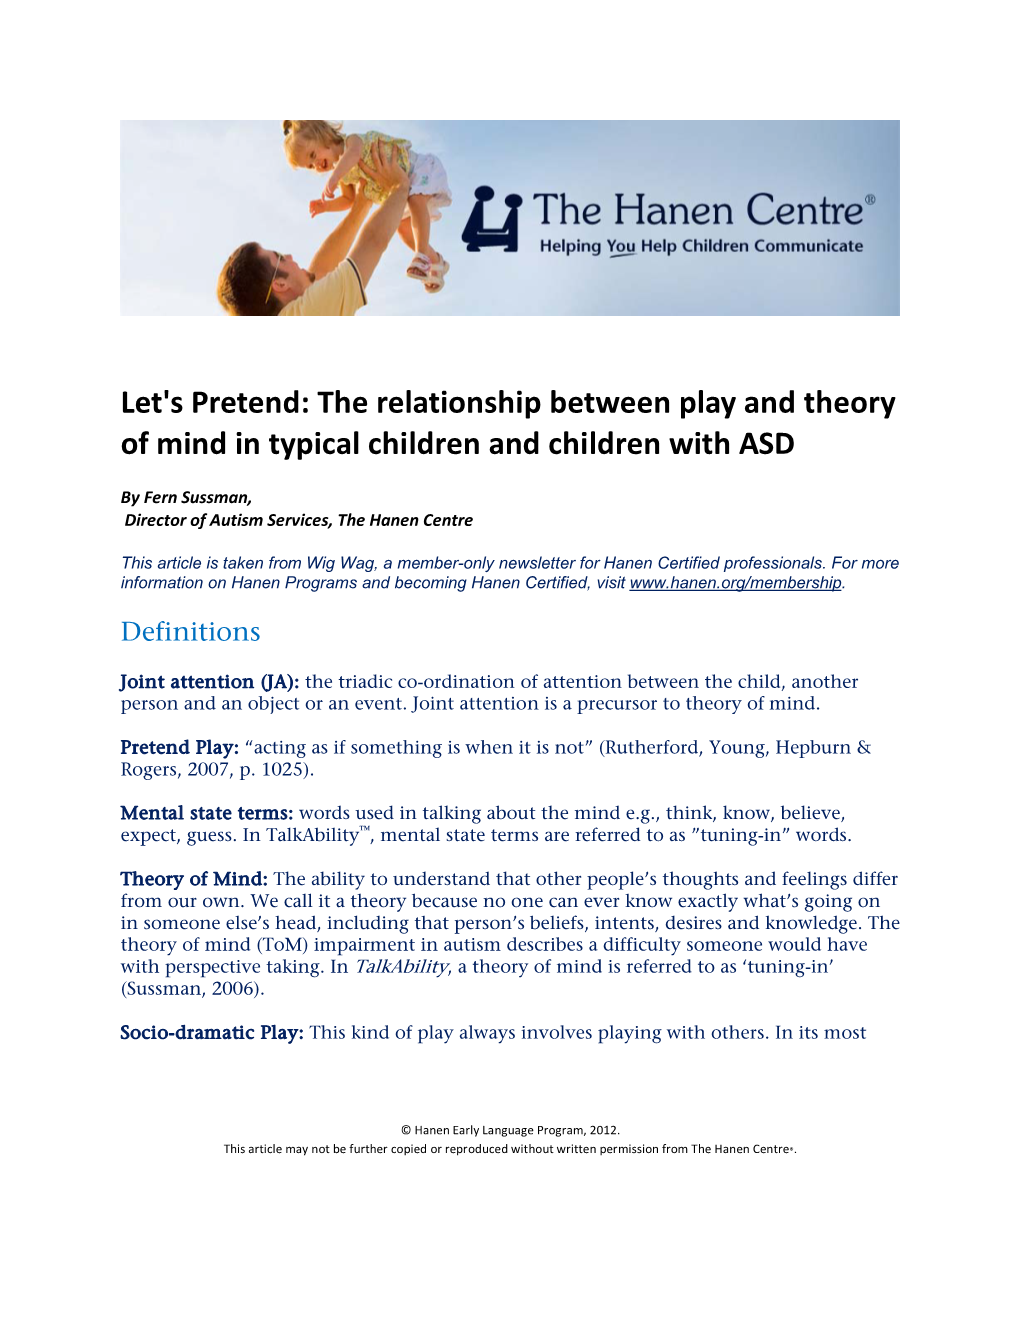 Let's Pretend: the Relationship Between Play and Theory of Mind In